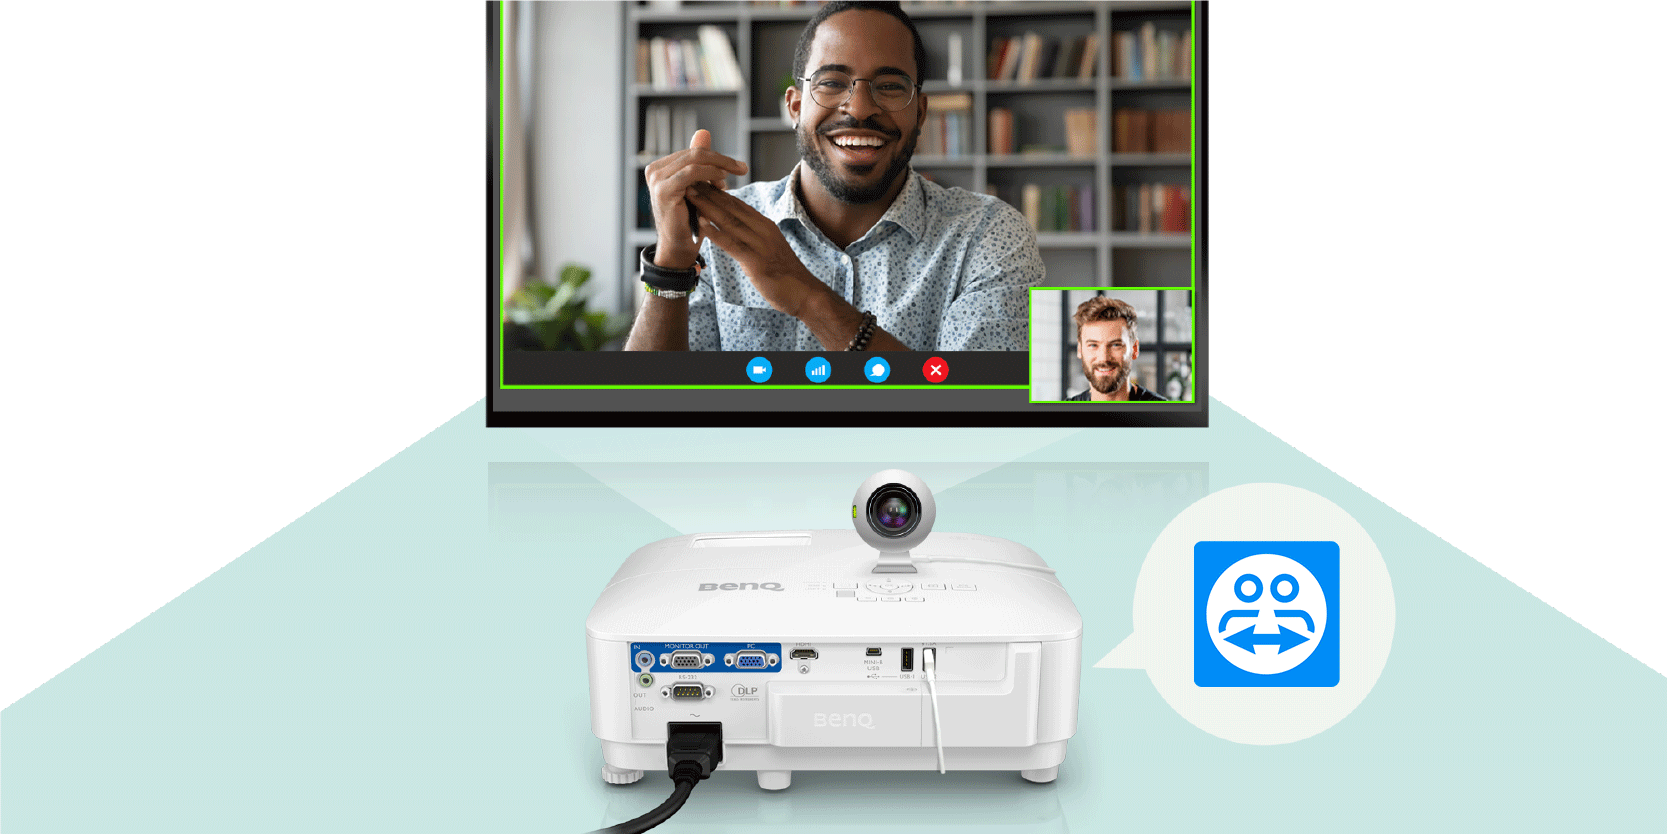 Software/hardware integration for starting remote meetings immediately